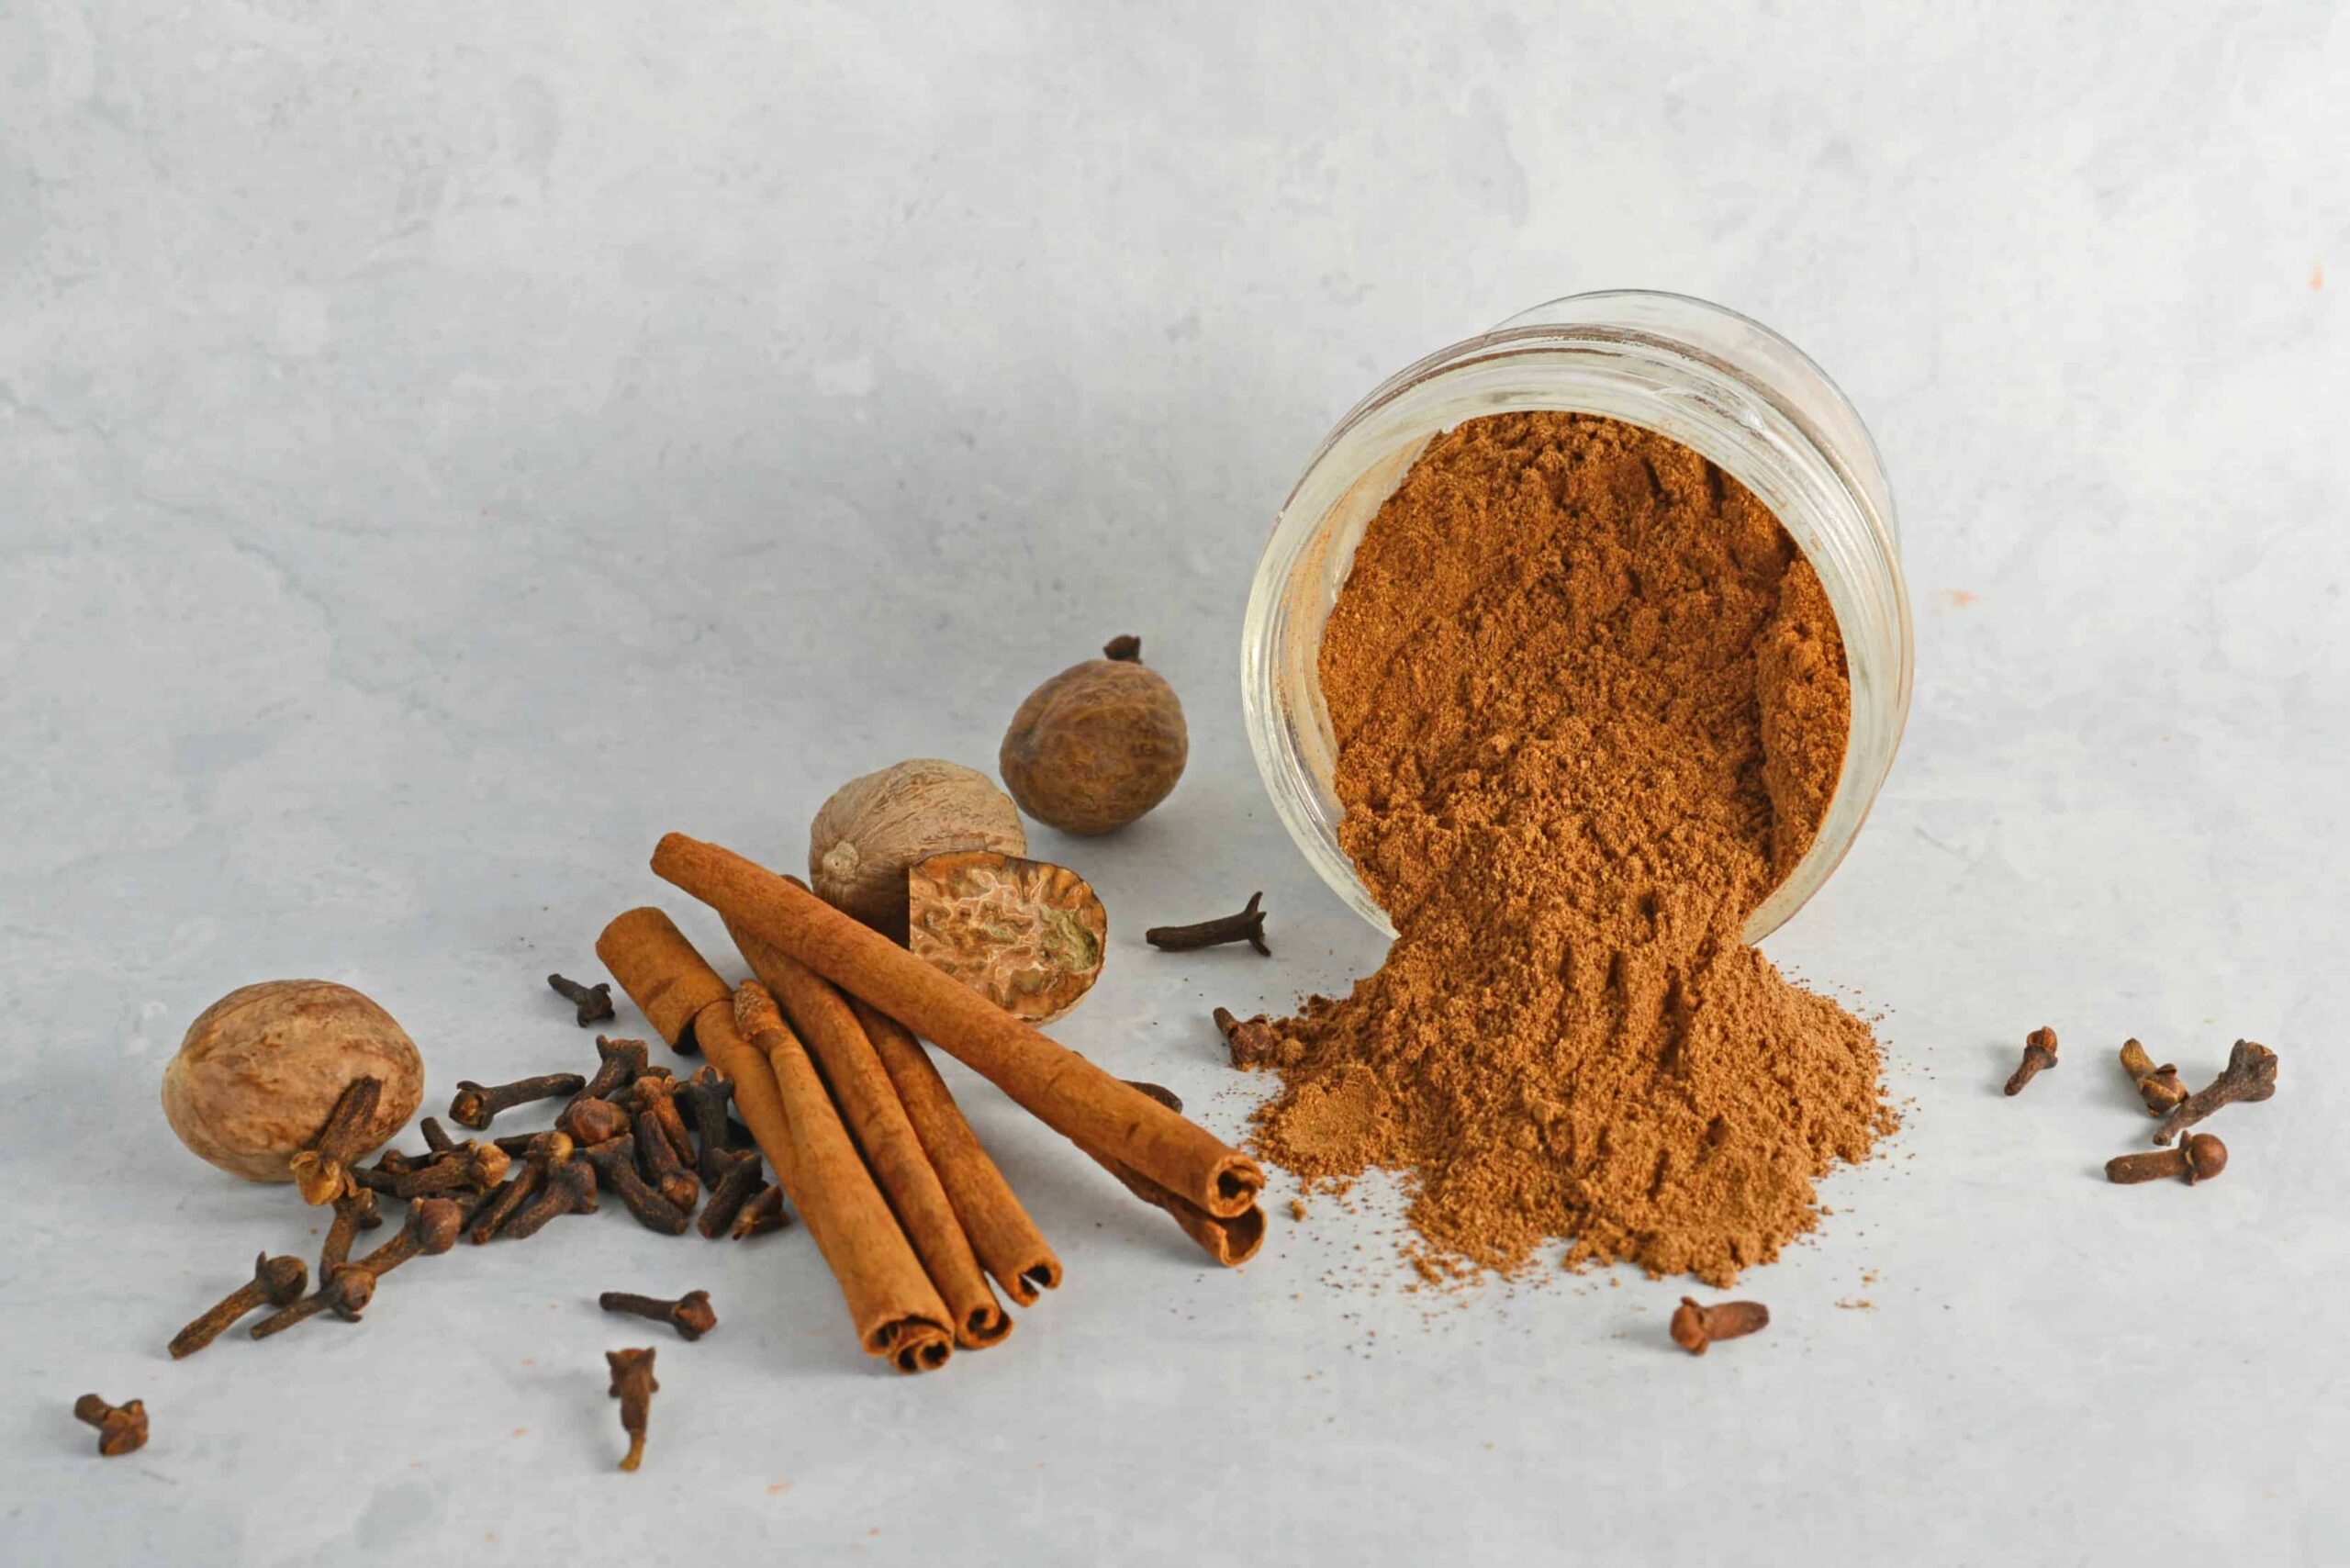 Homemade Pumpkin Pie Spice is a simple recipe made from ingredients you already have in your pantry! It also makes an excellent homemade gift! #homemadepumpkinpiespice #whatisinpumpkinpiespice #pumpkinspice www.savoryexperiments.com